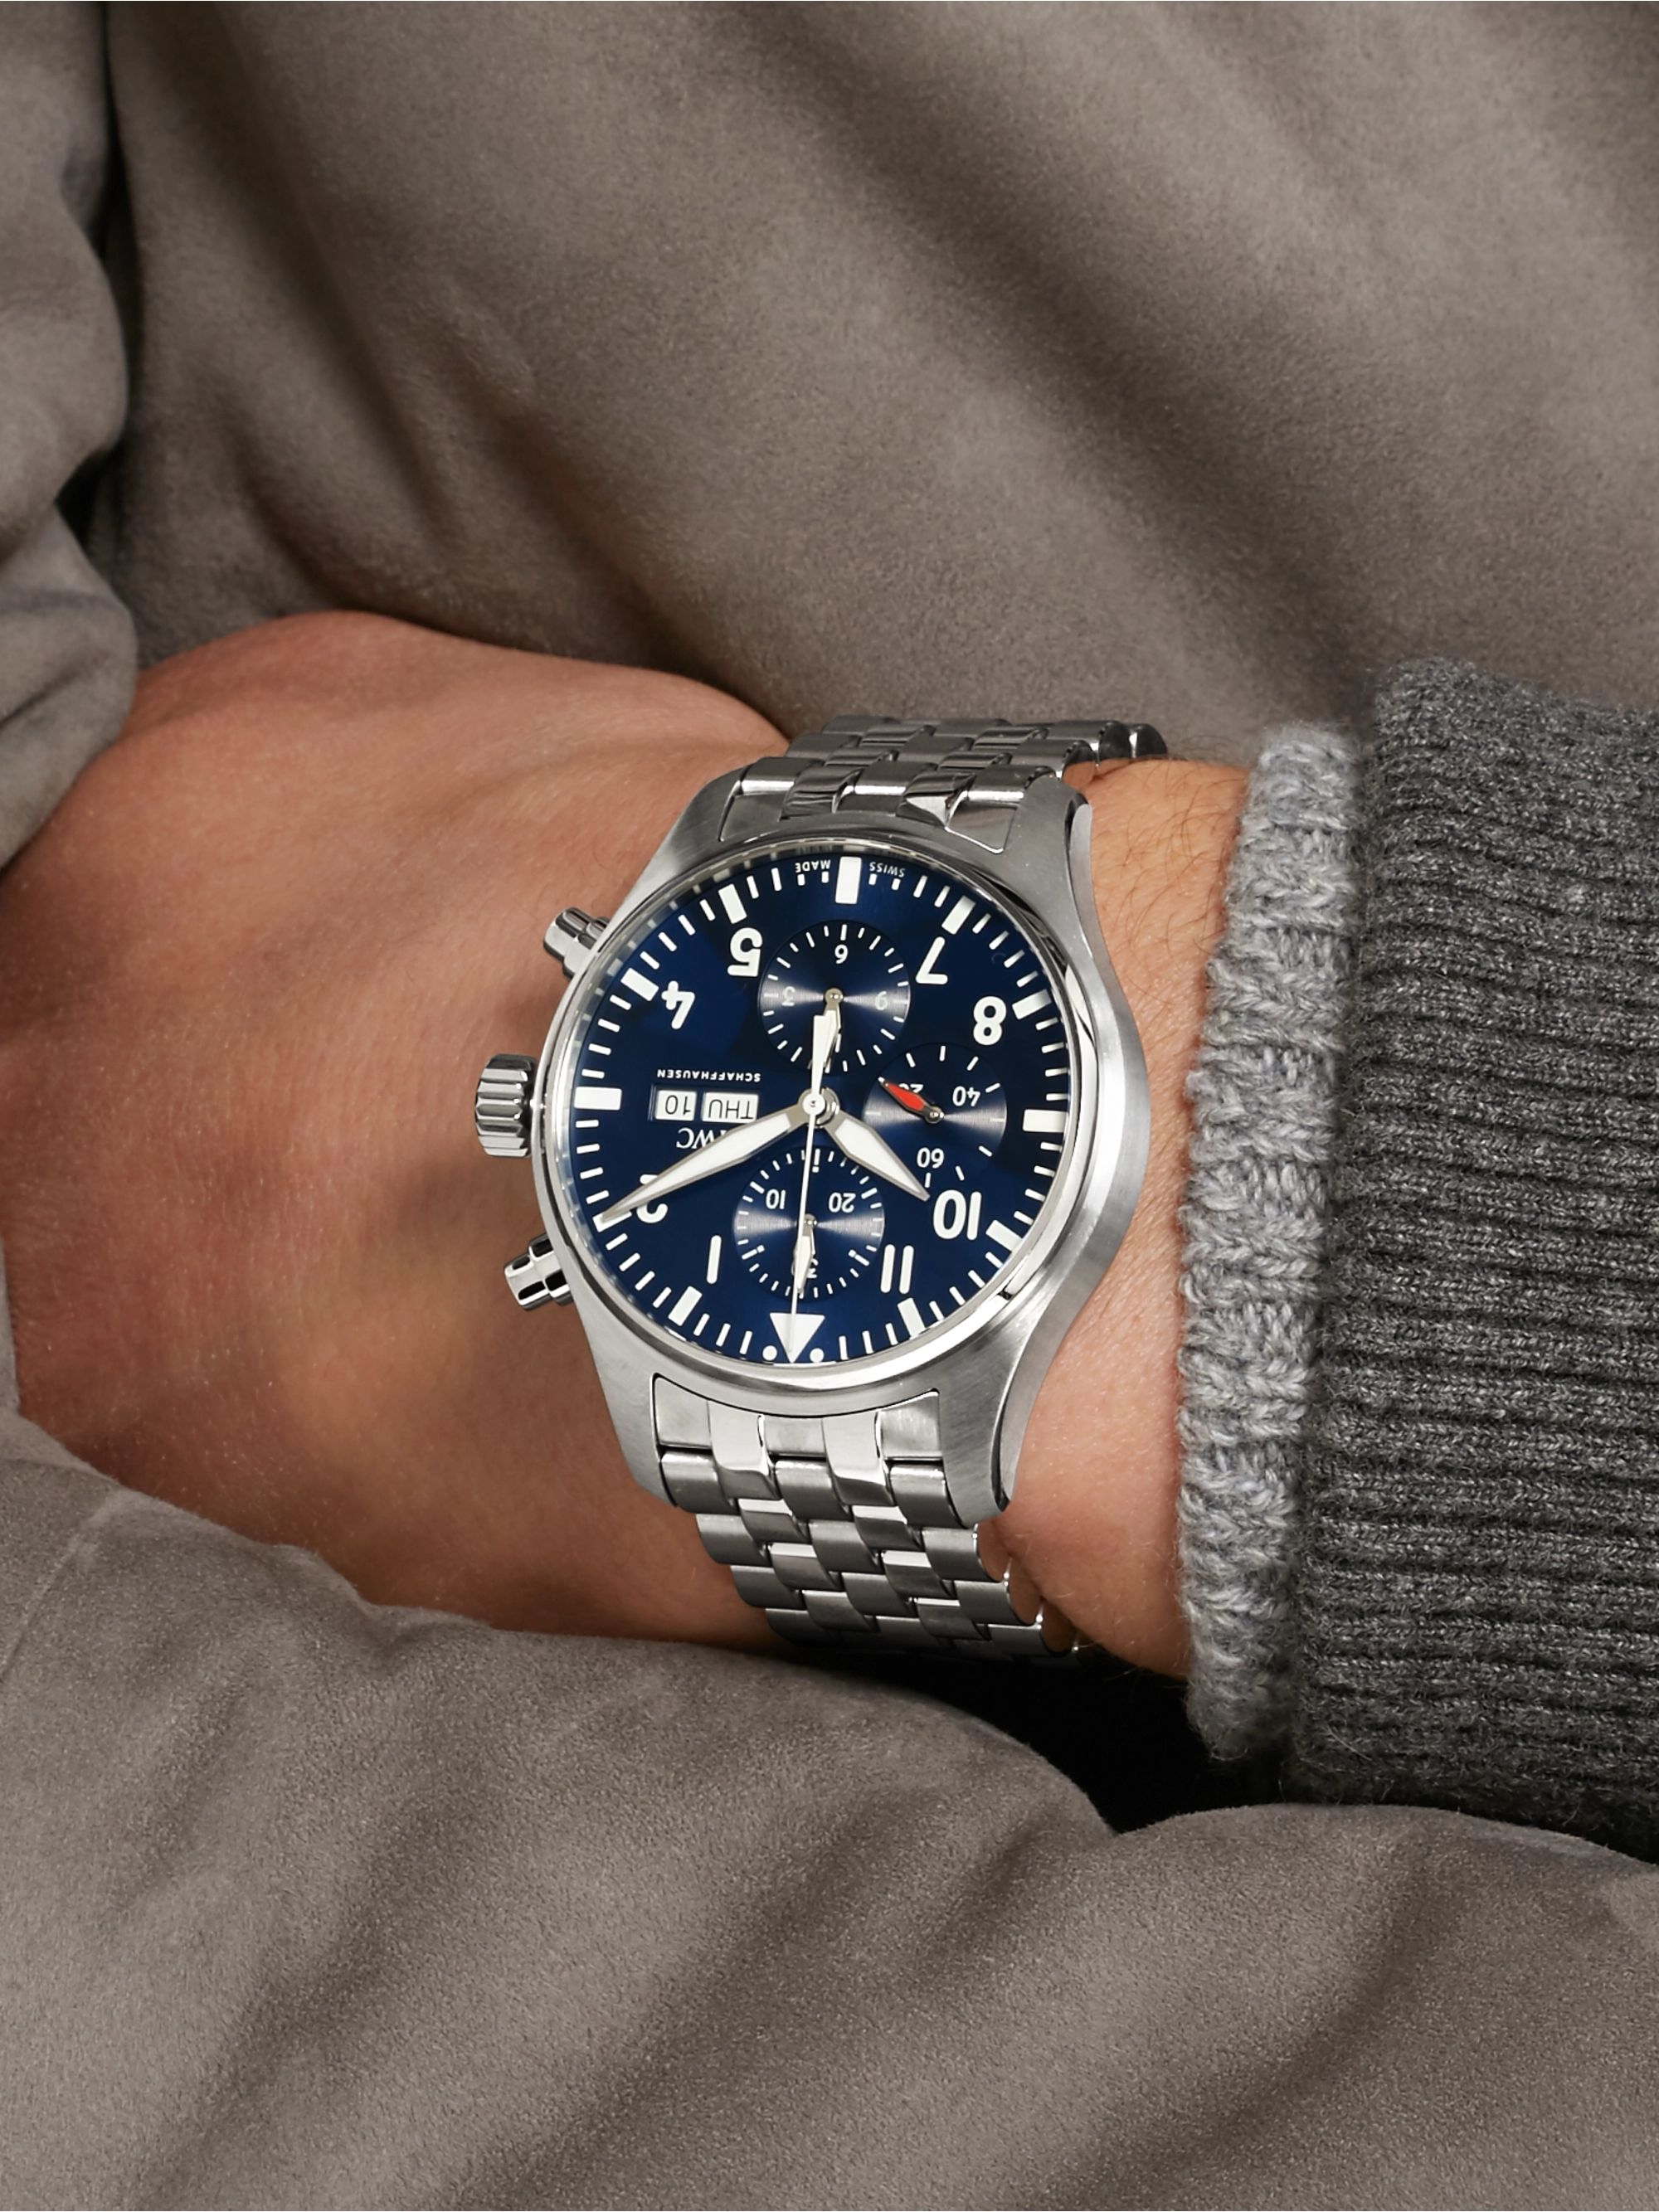 IWC SCHAFFHAUSEN Pilot's Le Petit Prince Edition Chronograph 43mm Stainless Steel Watch, Ref. No. IW377717